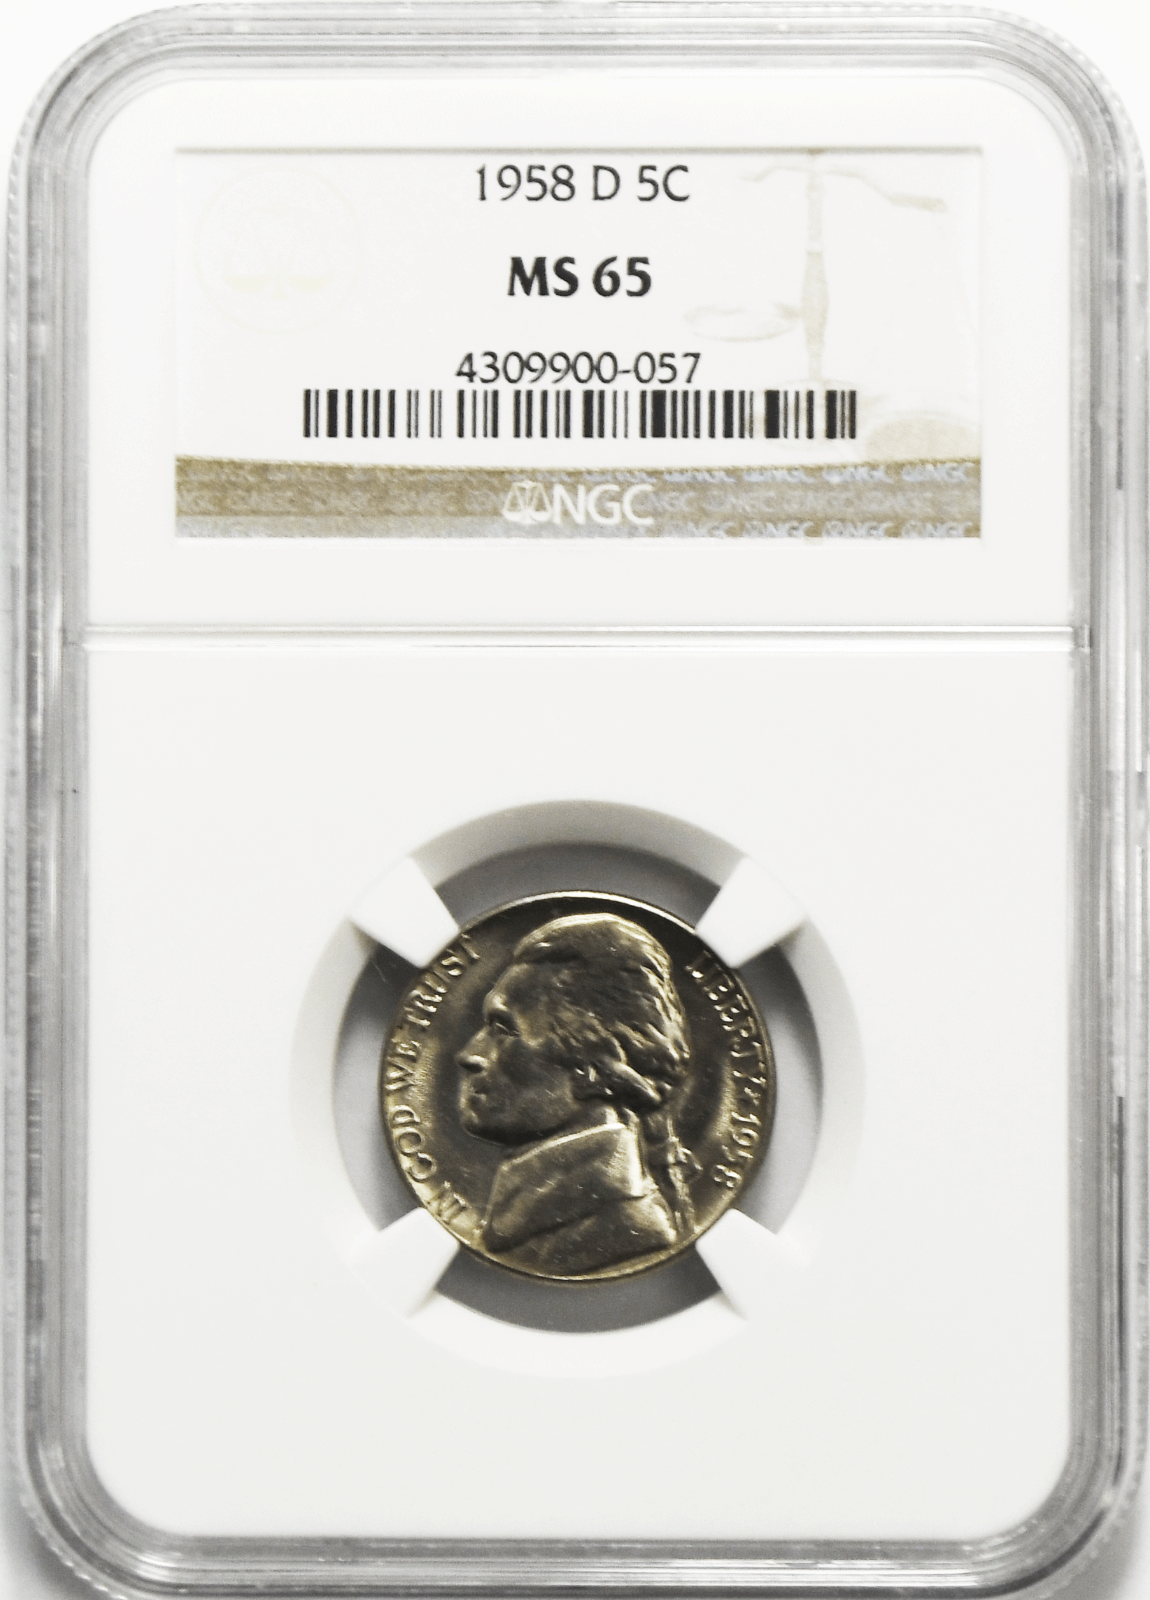 1958 D 5c Jefferson Nickel NGC Five Cents MS65 Brilliant Uncirculated